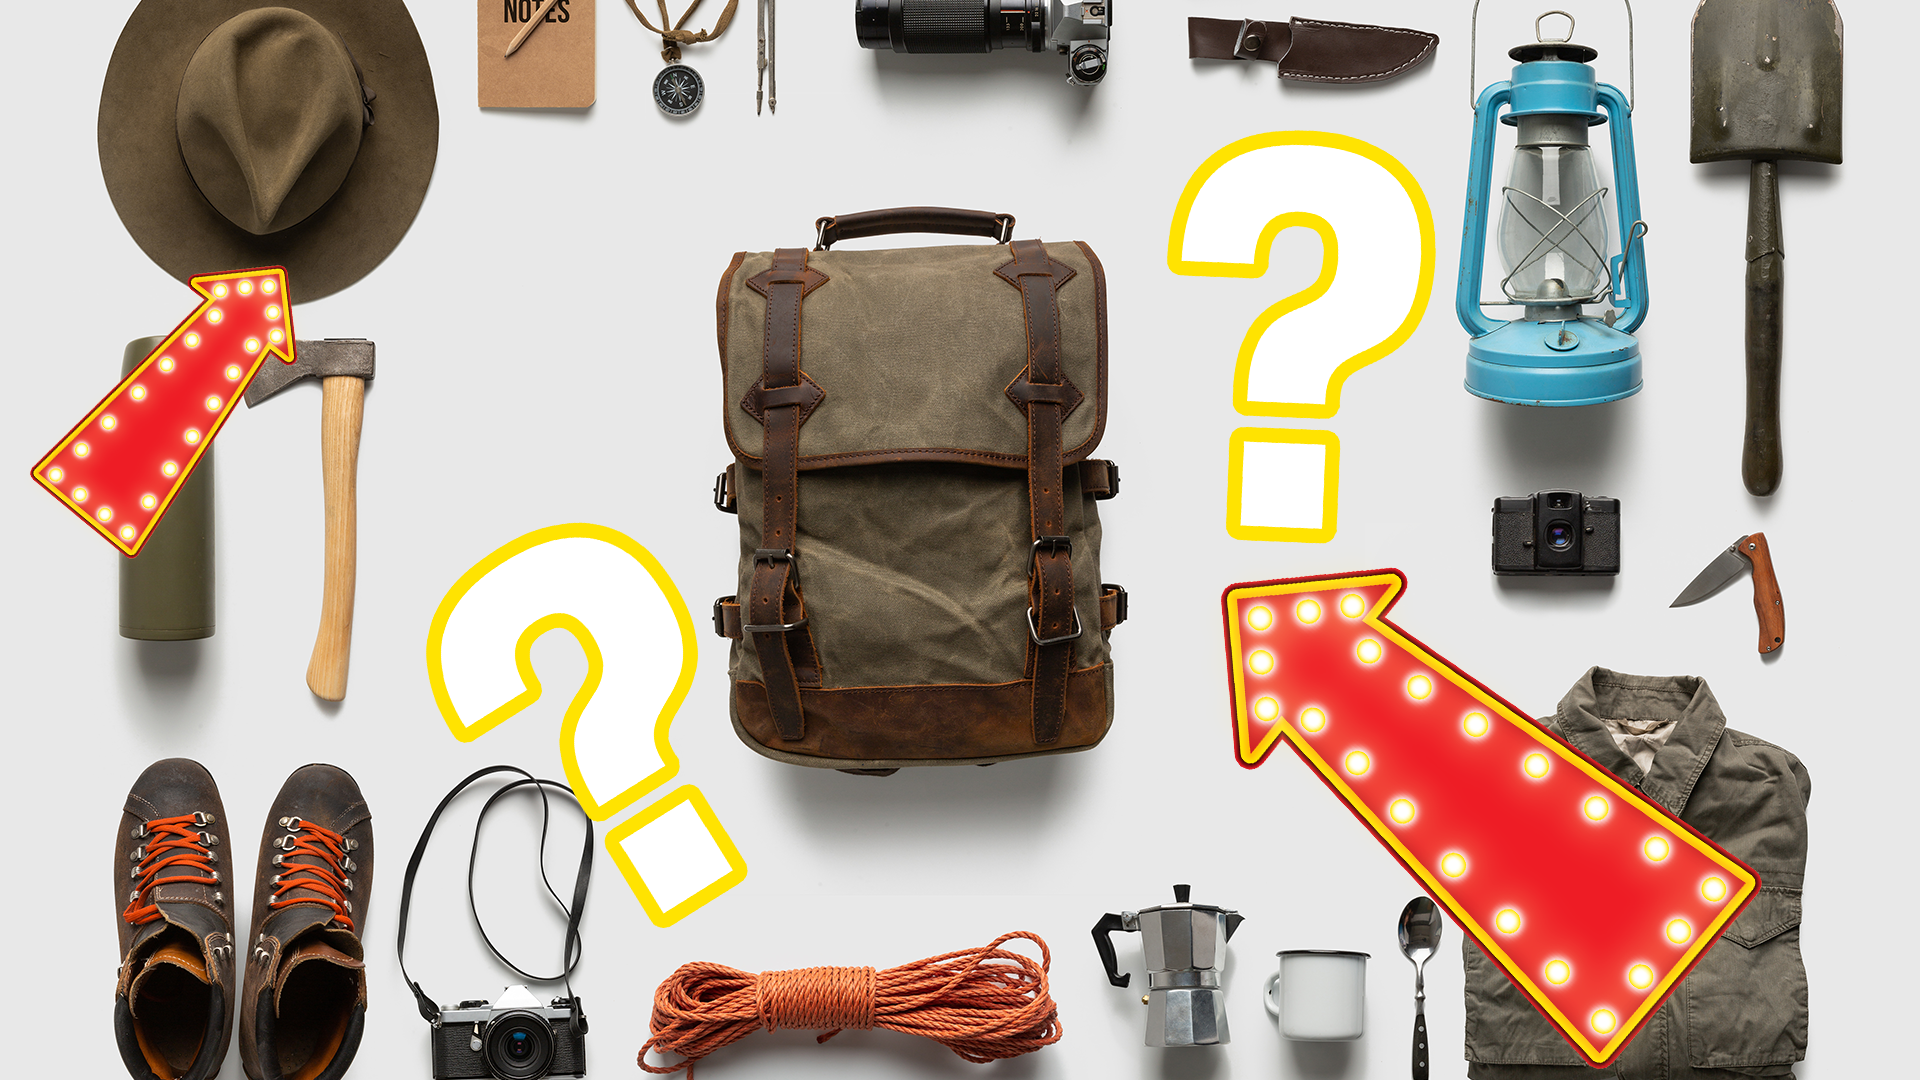 Camping equipment on white background with question mark